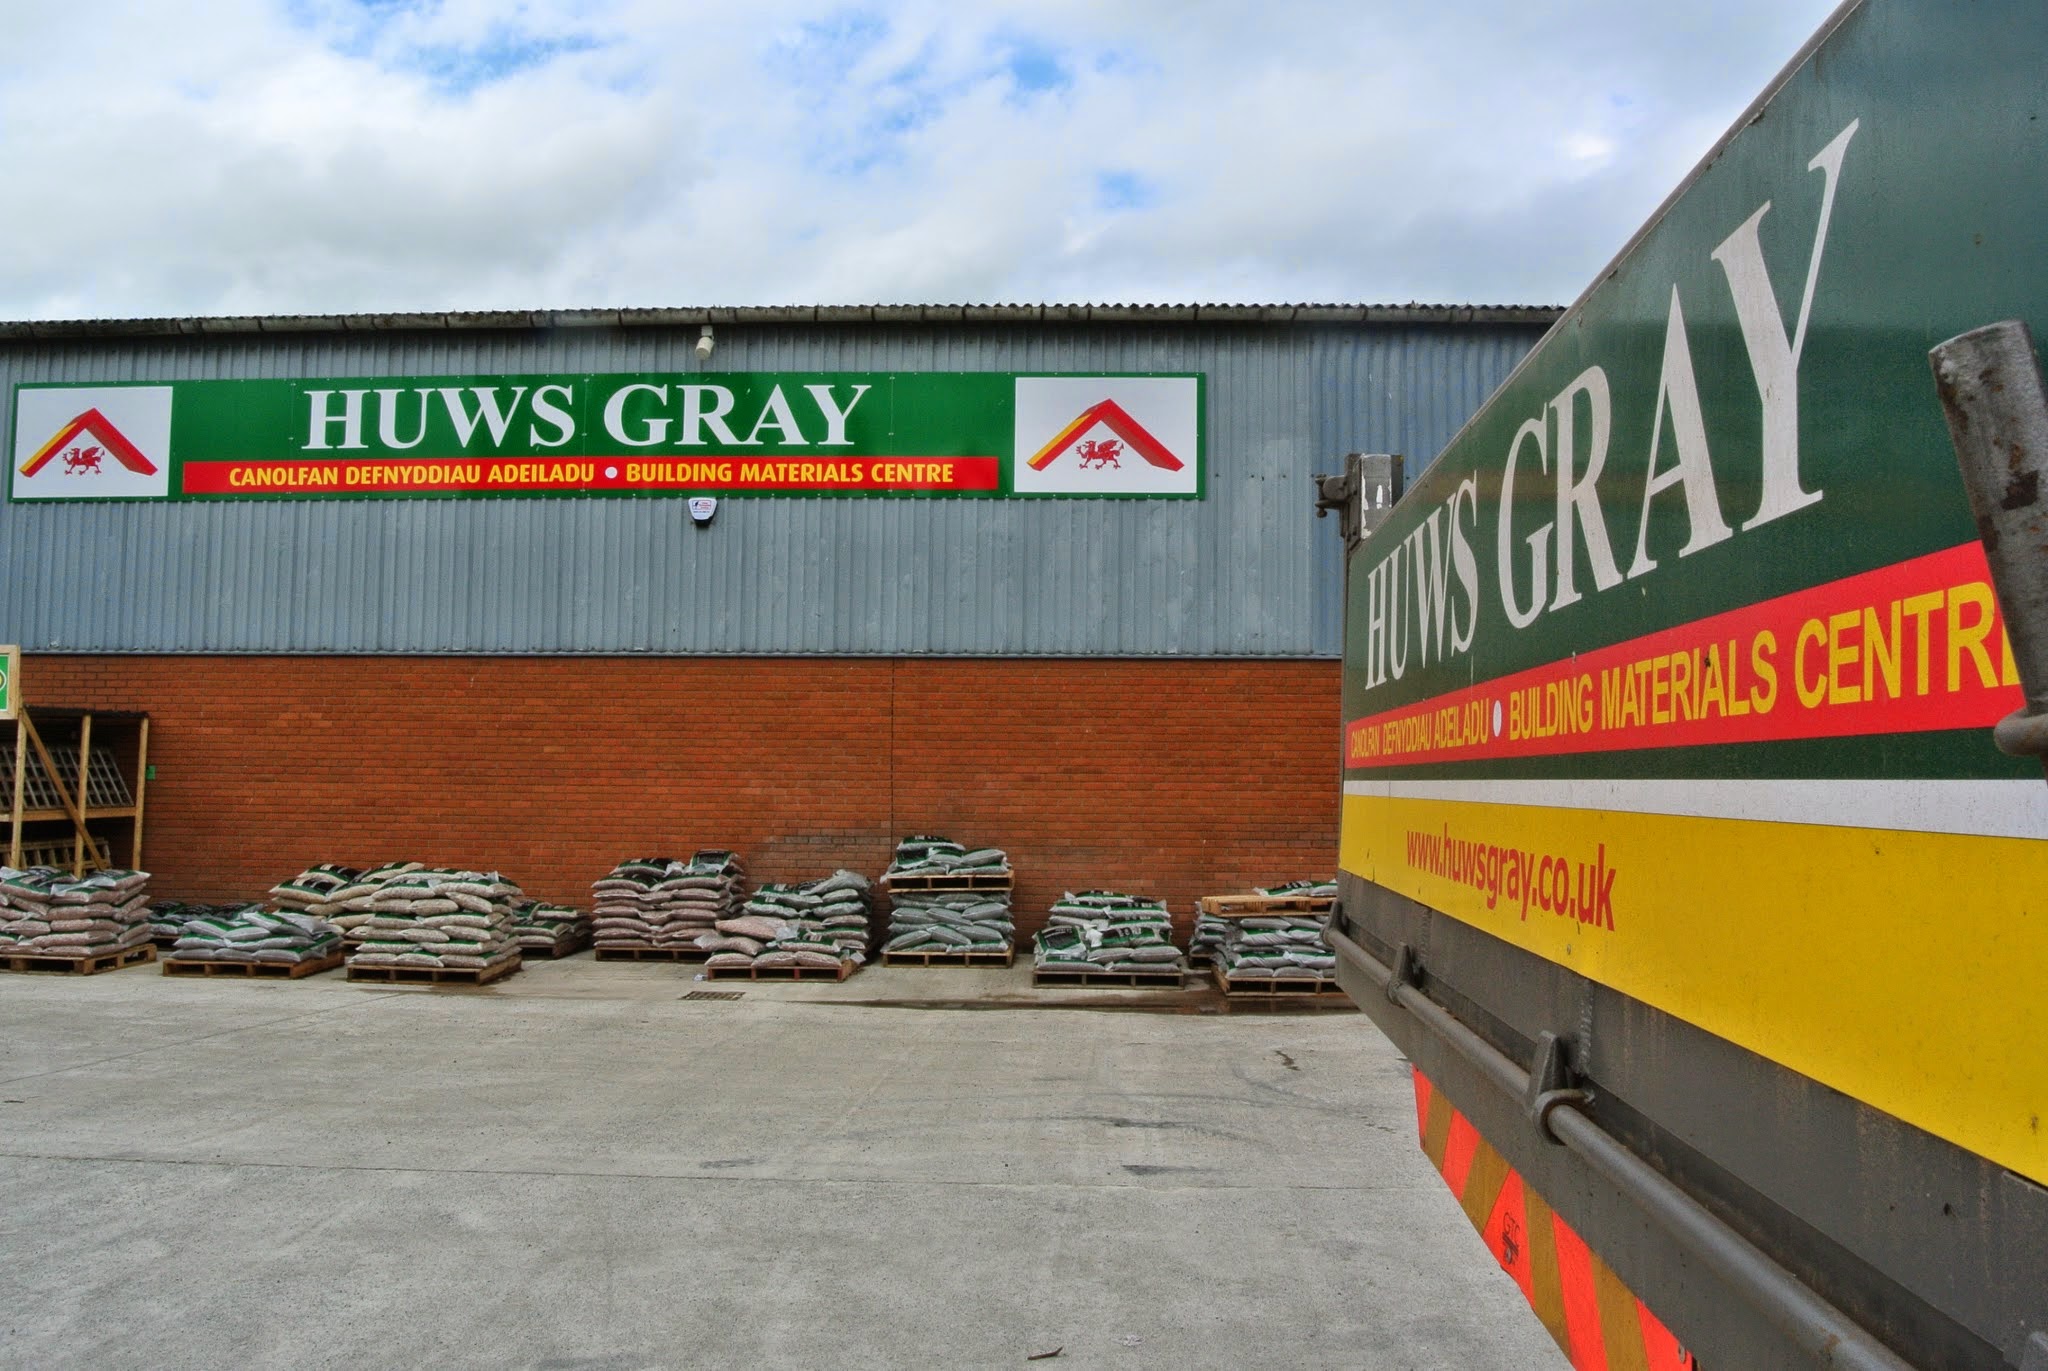 Images Huws Gray Hay-on-Wye